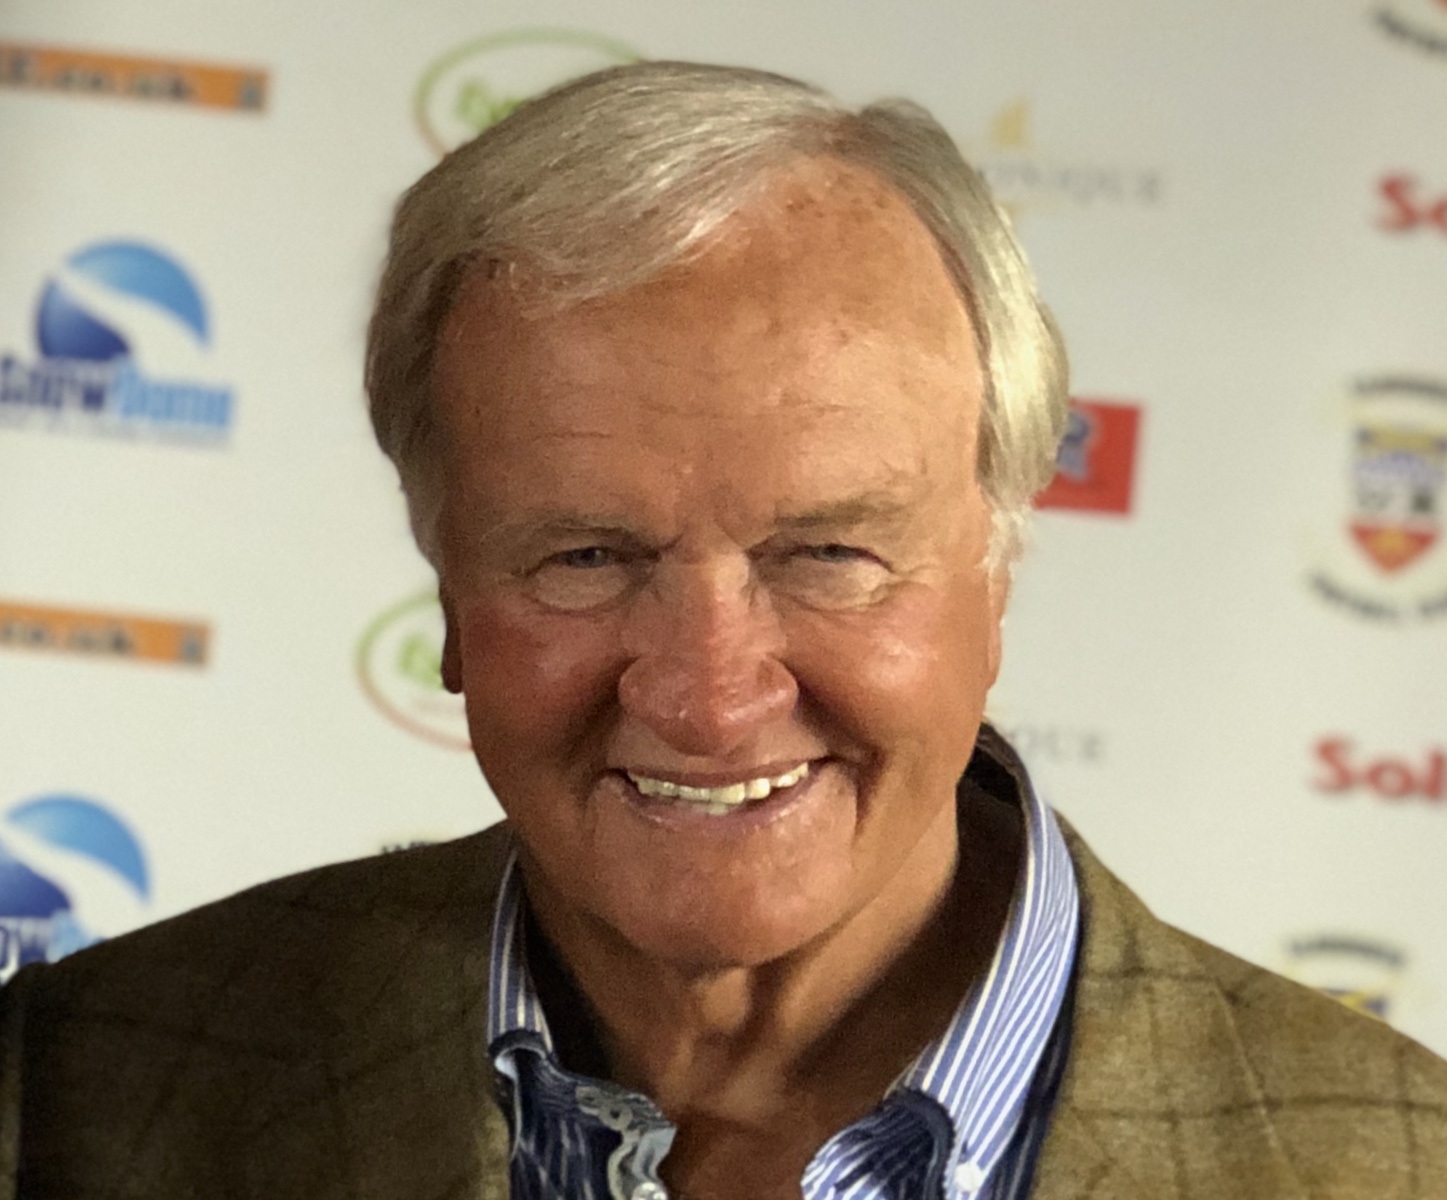 How tall is Ron Atkinson?